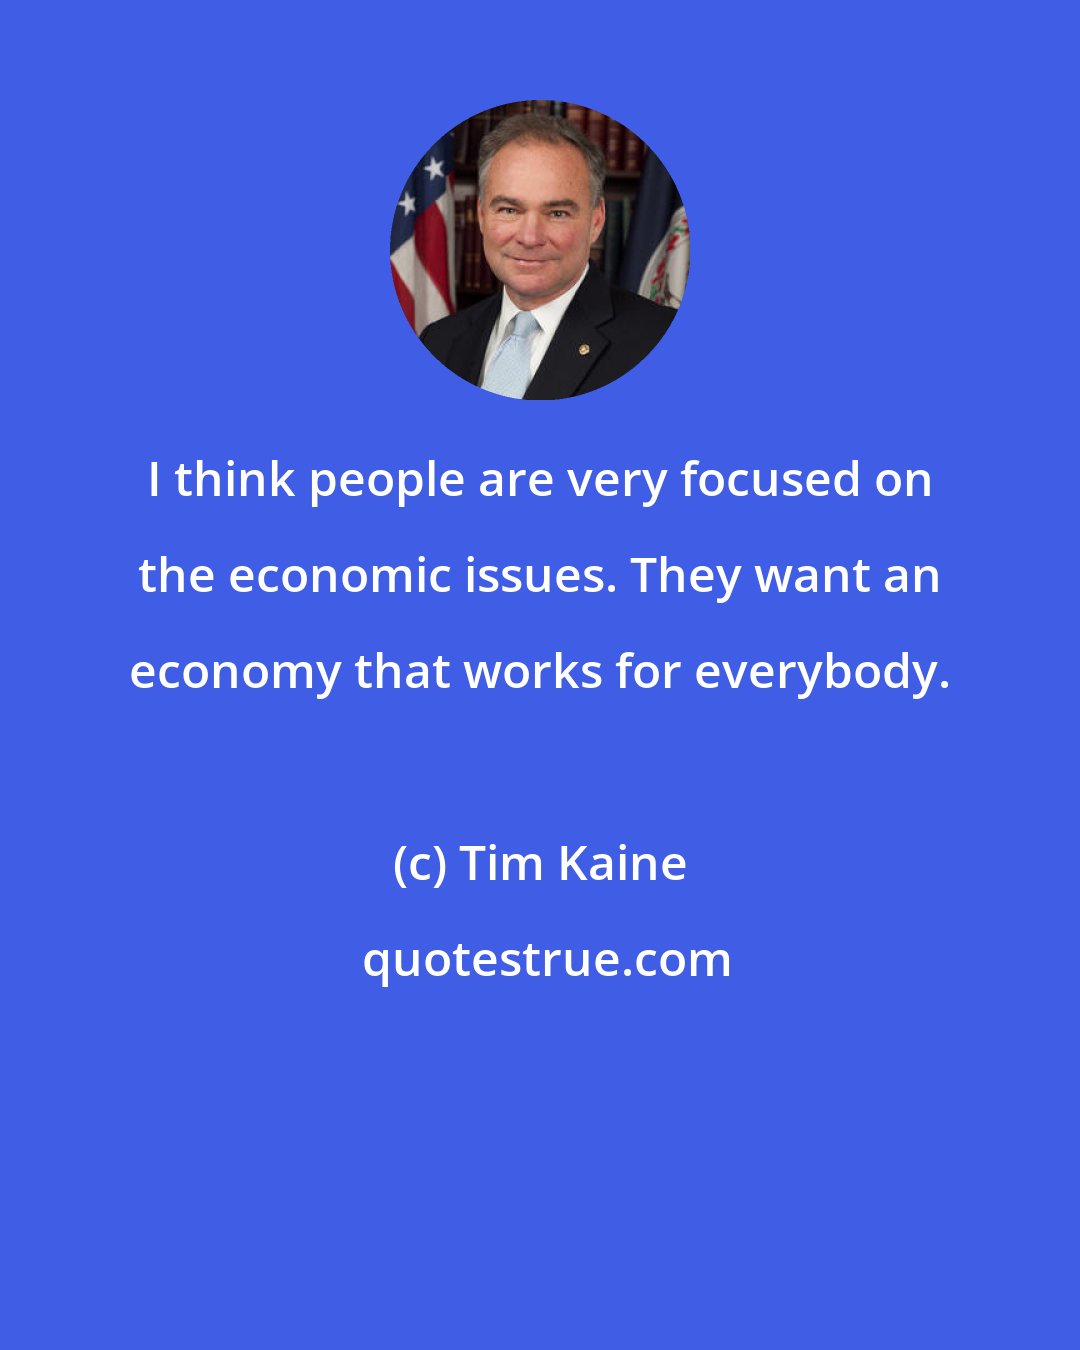 Tim Kaine: I think people are very focused on the economic issues. They want an economy that works for everybody.